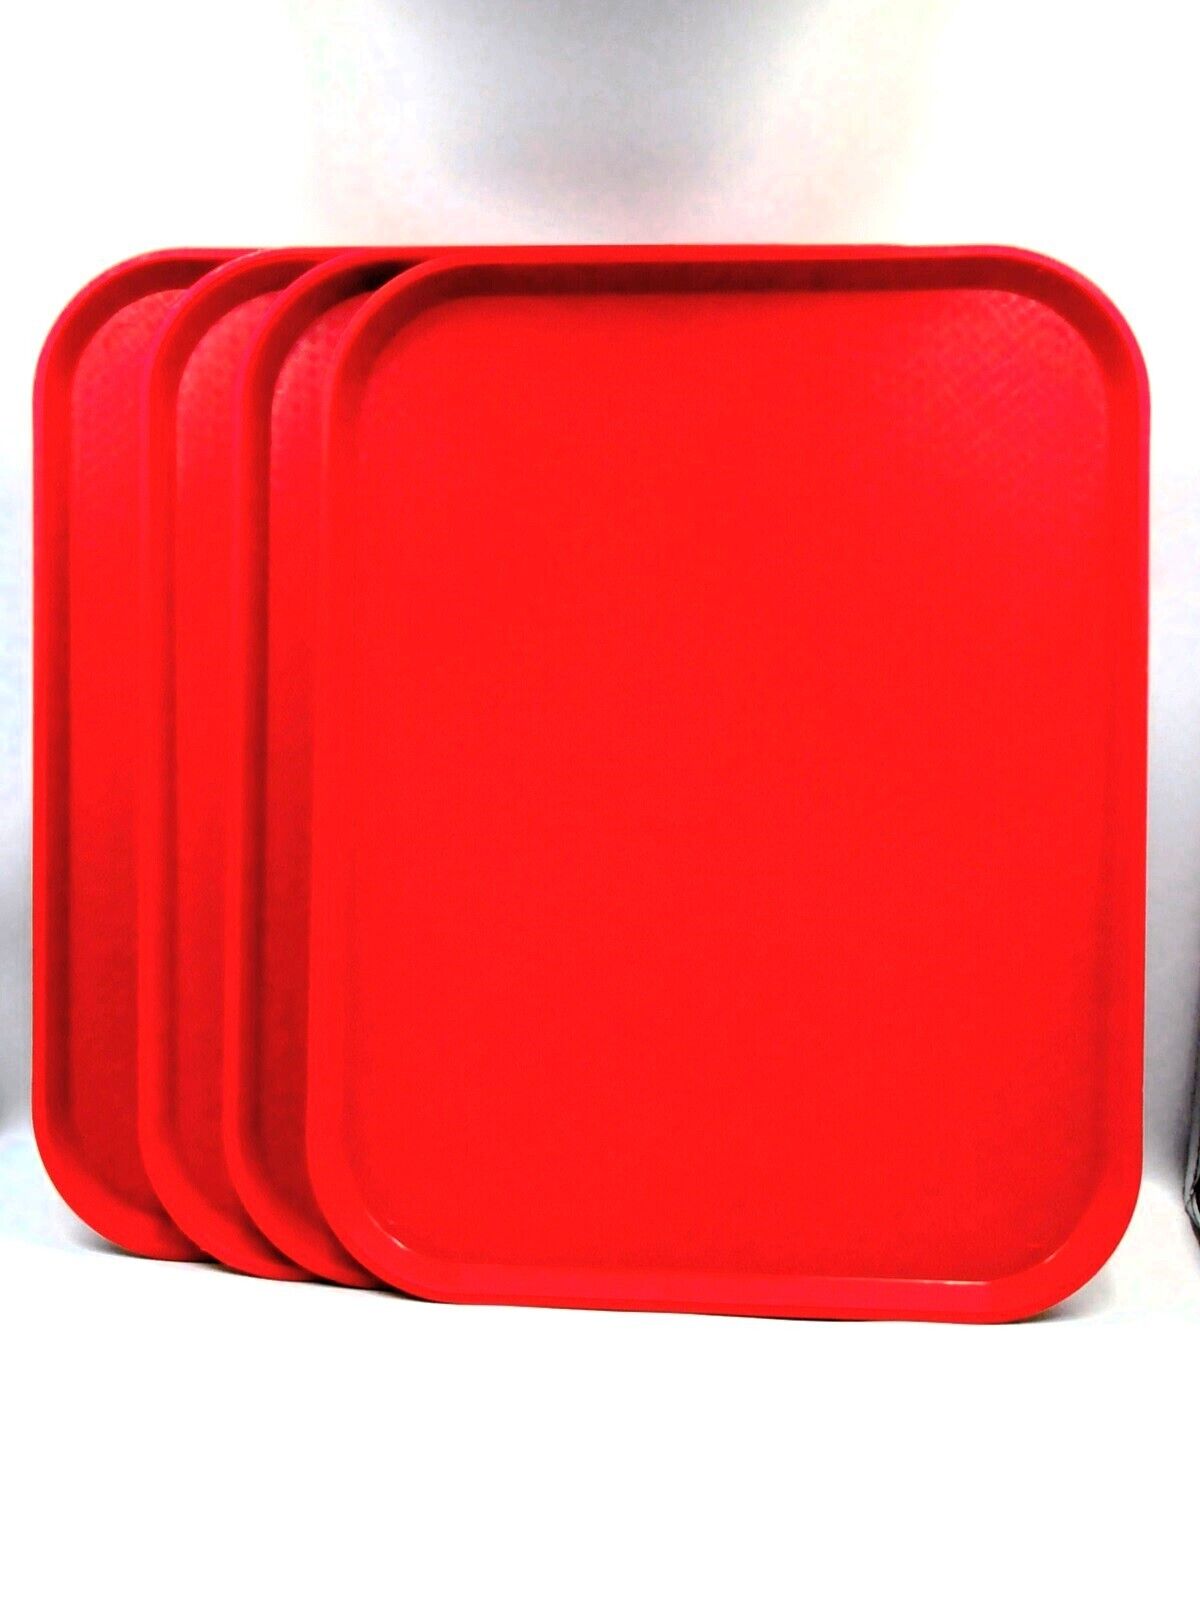 1 Vintage Cambro Red Cafeteria Lunchroom Tray 18x14 in. 1418FF Fast Food Service